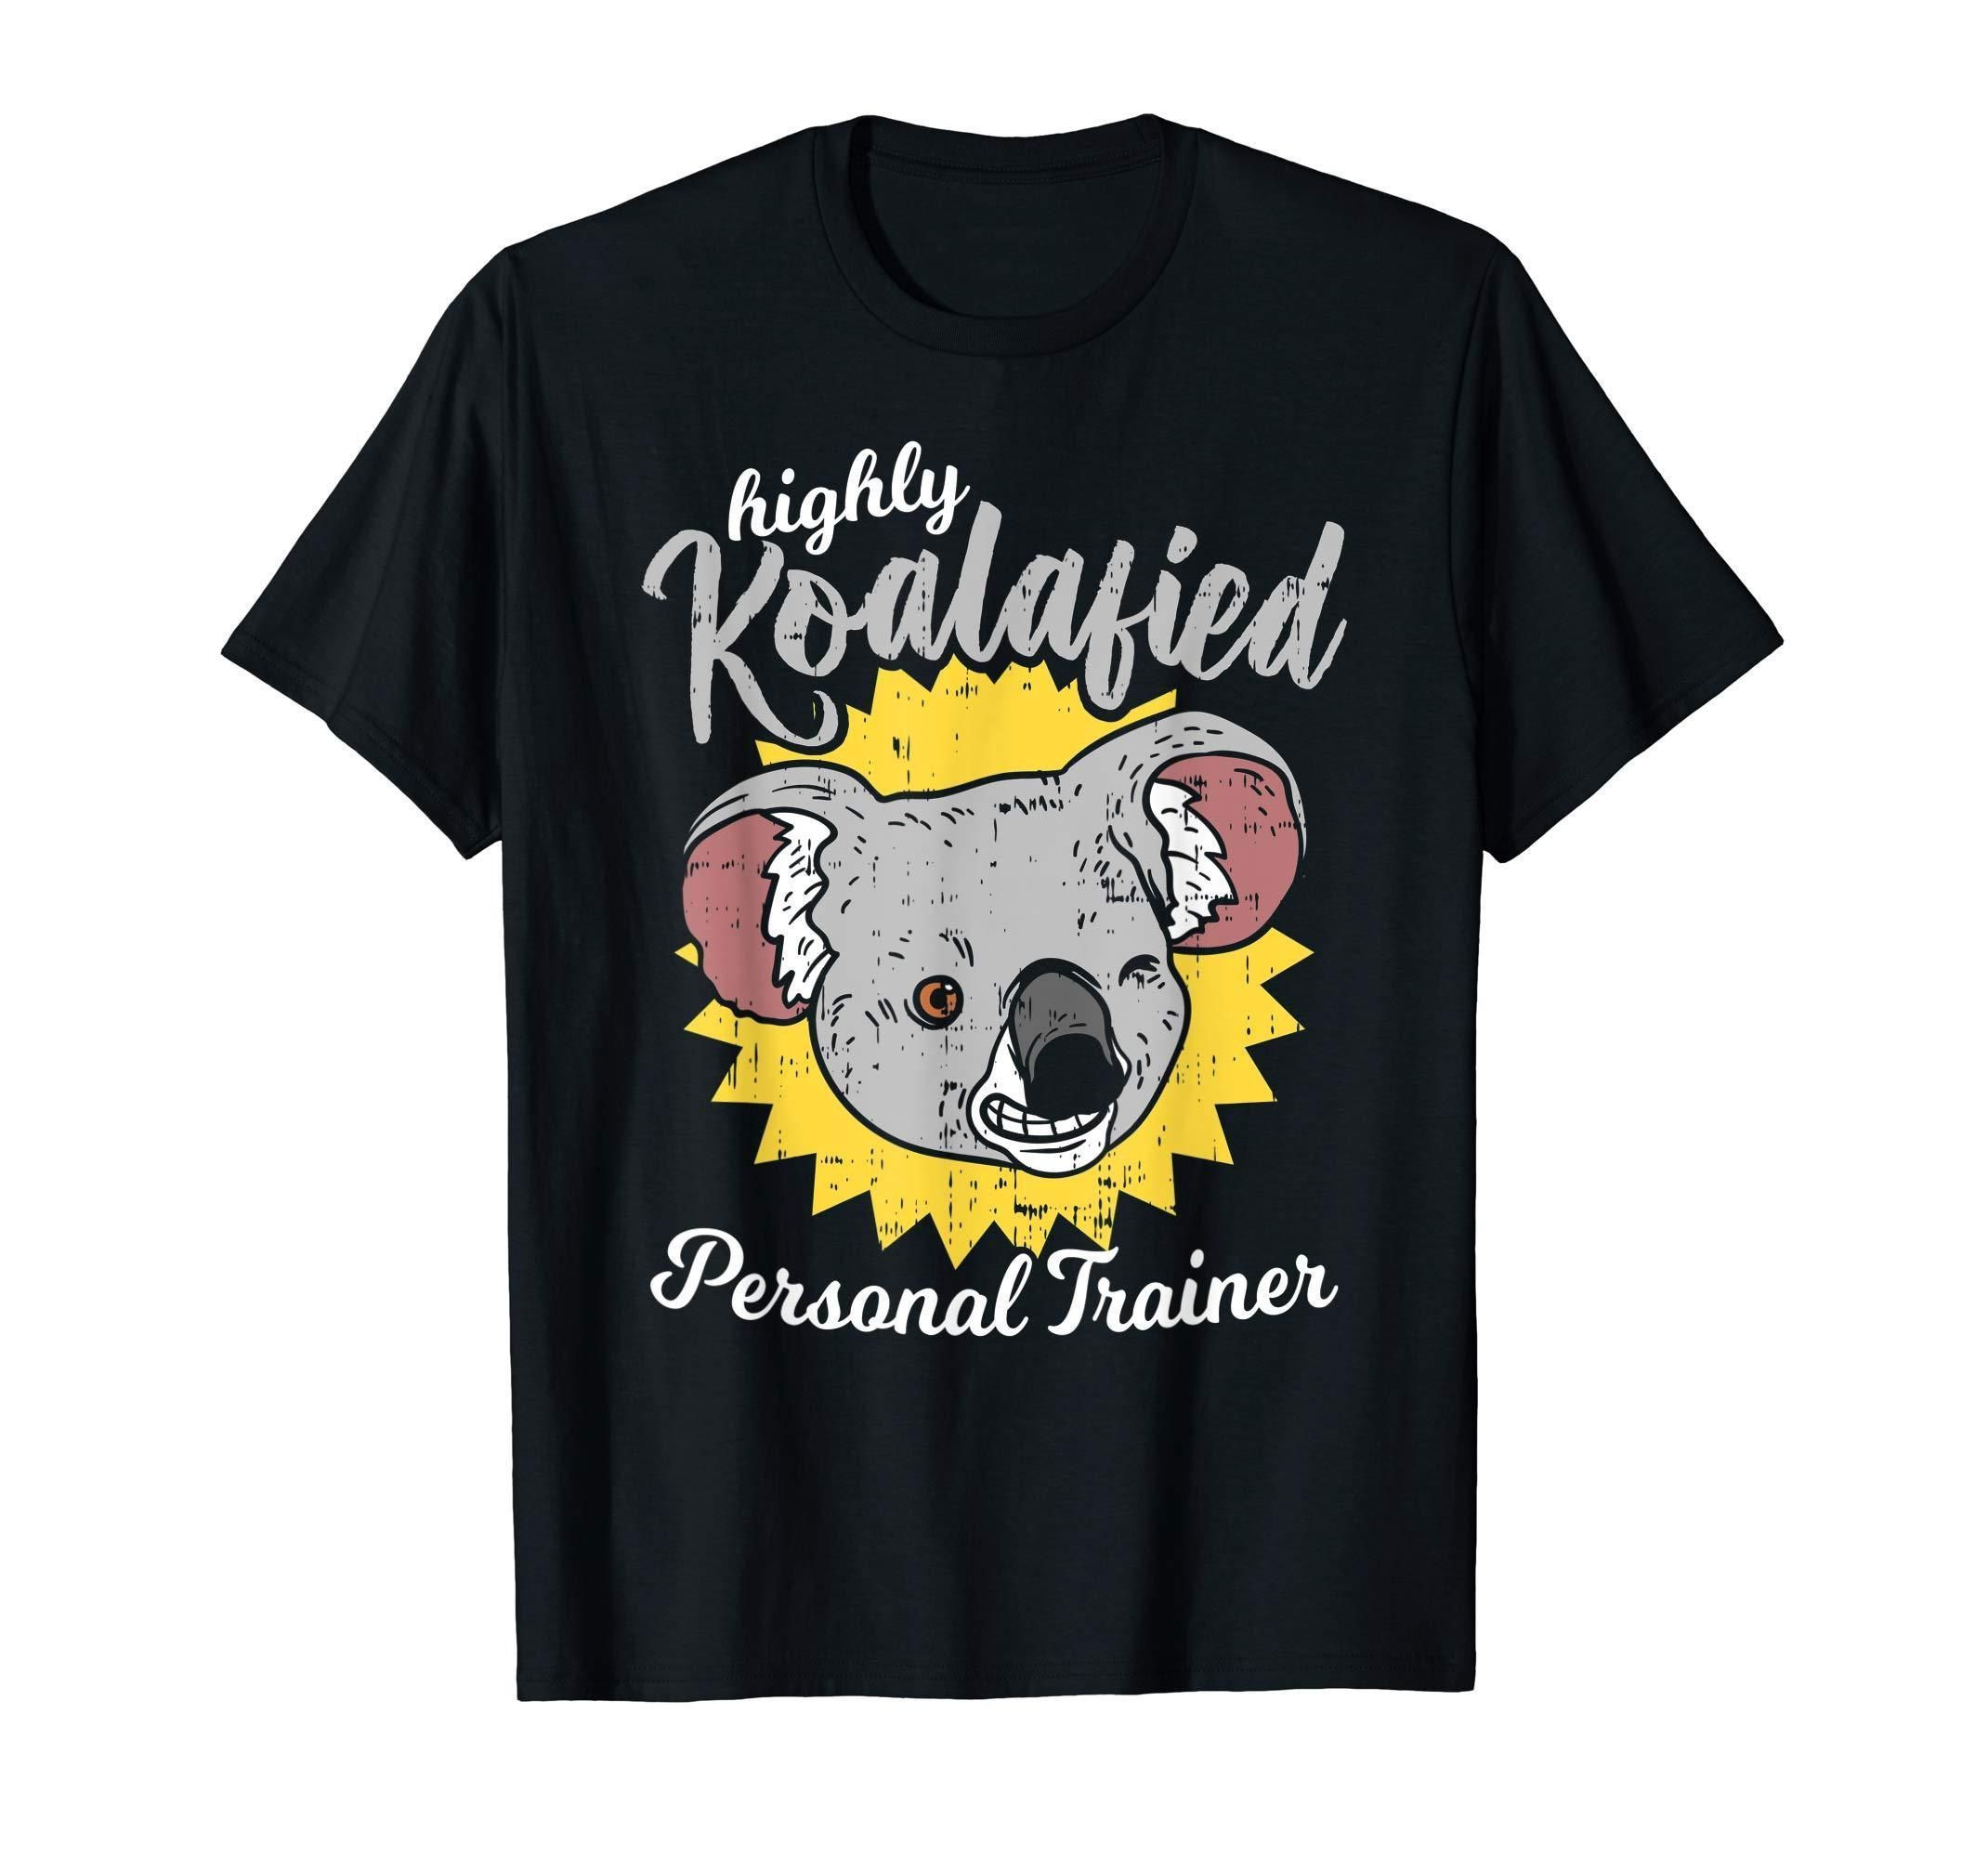 Highly Koalafied Personal Trainer T-Shirt Punny Men Women